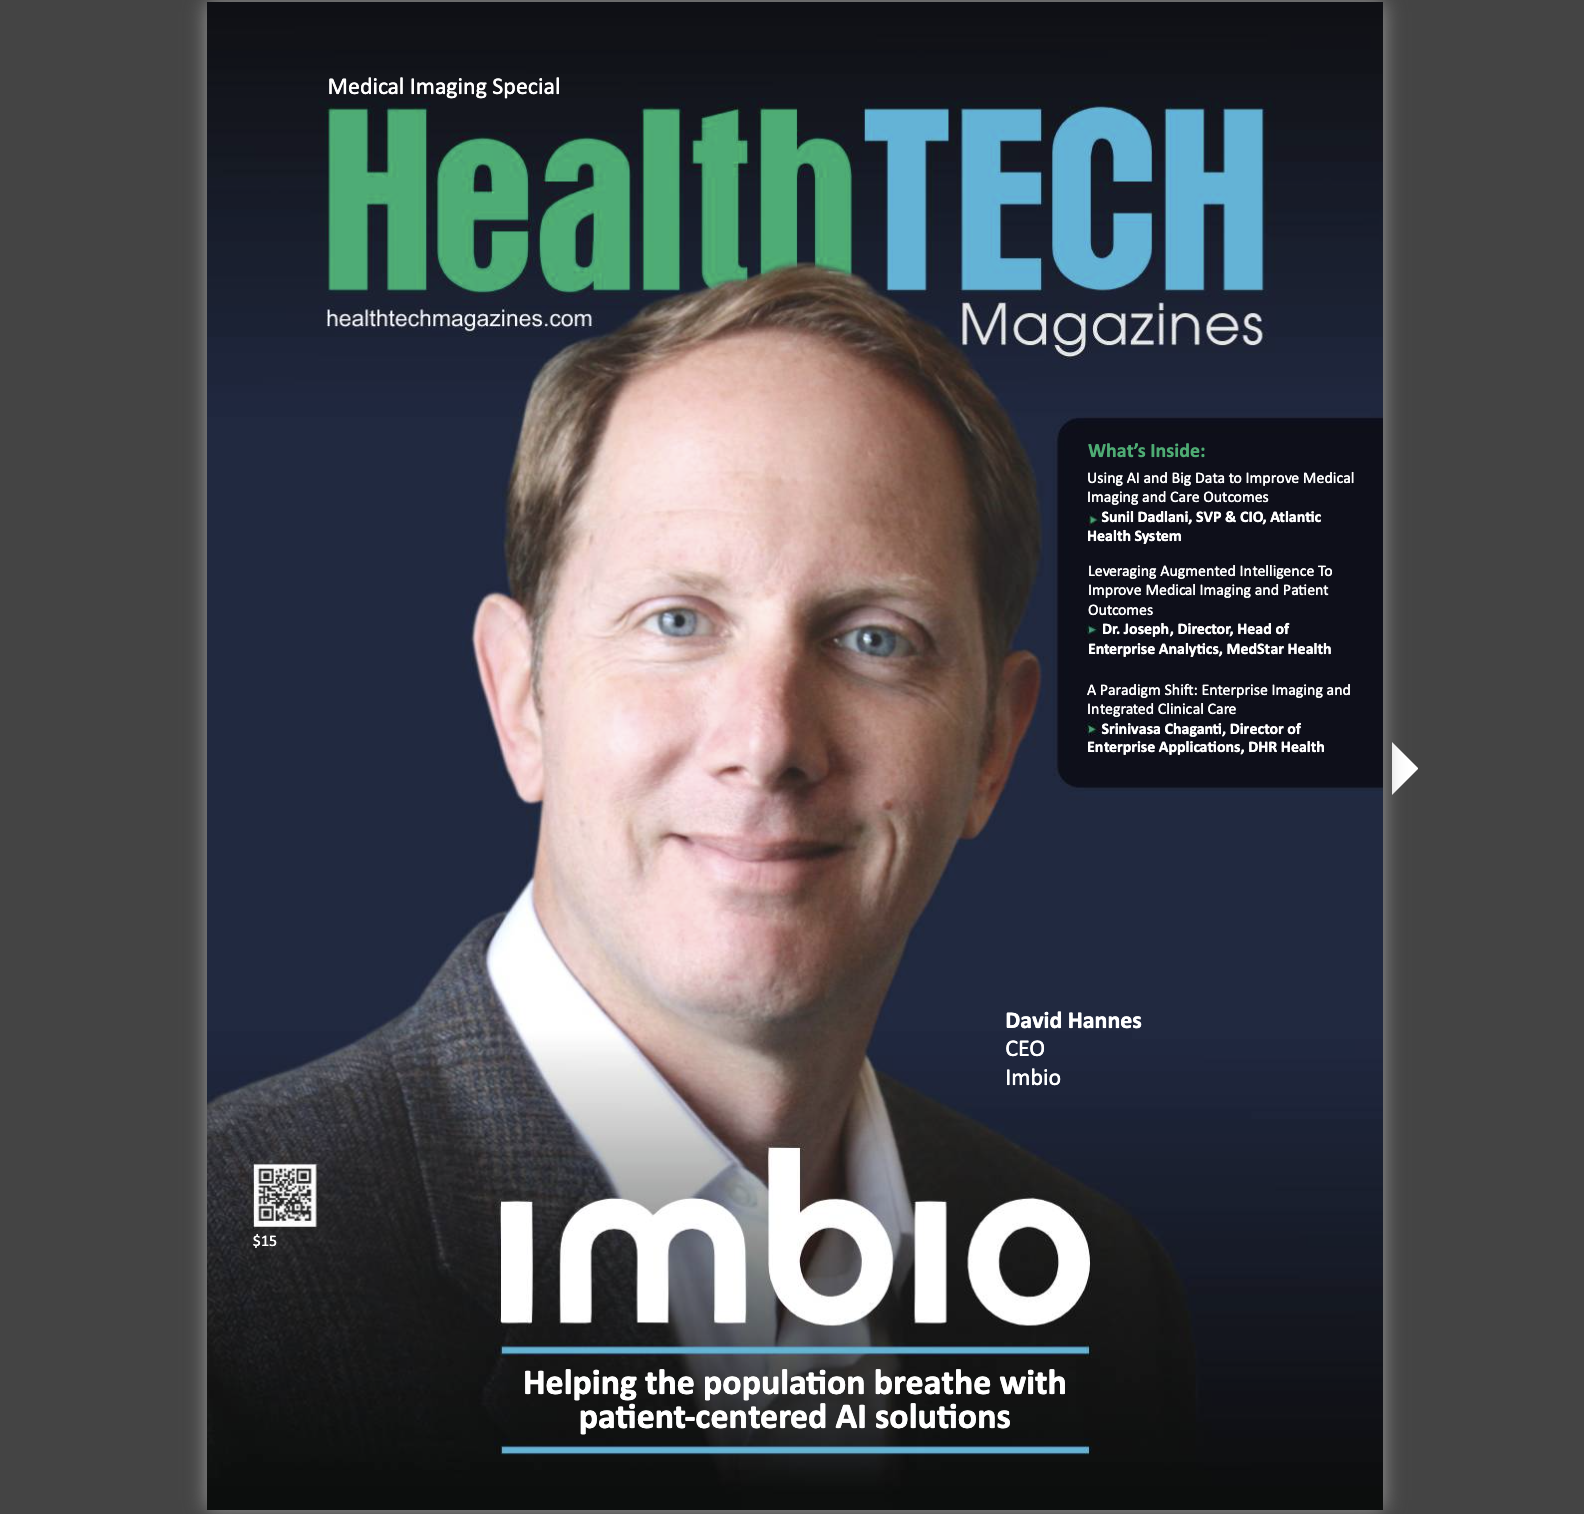 HealthTECH Magazine: Helping the population breathe with patient-centered AI solutions